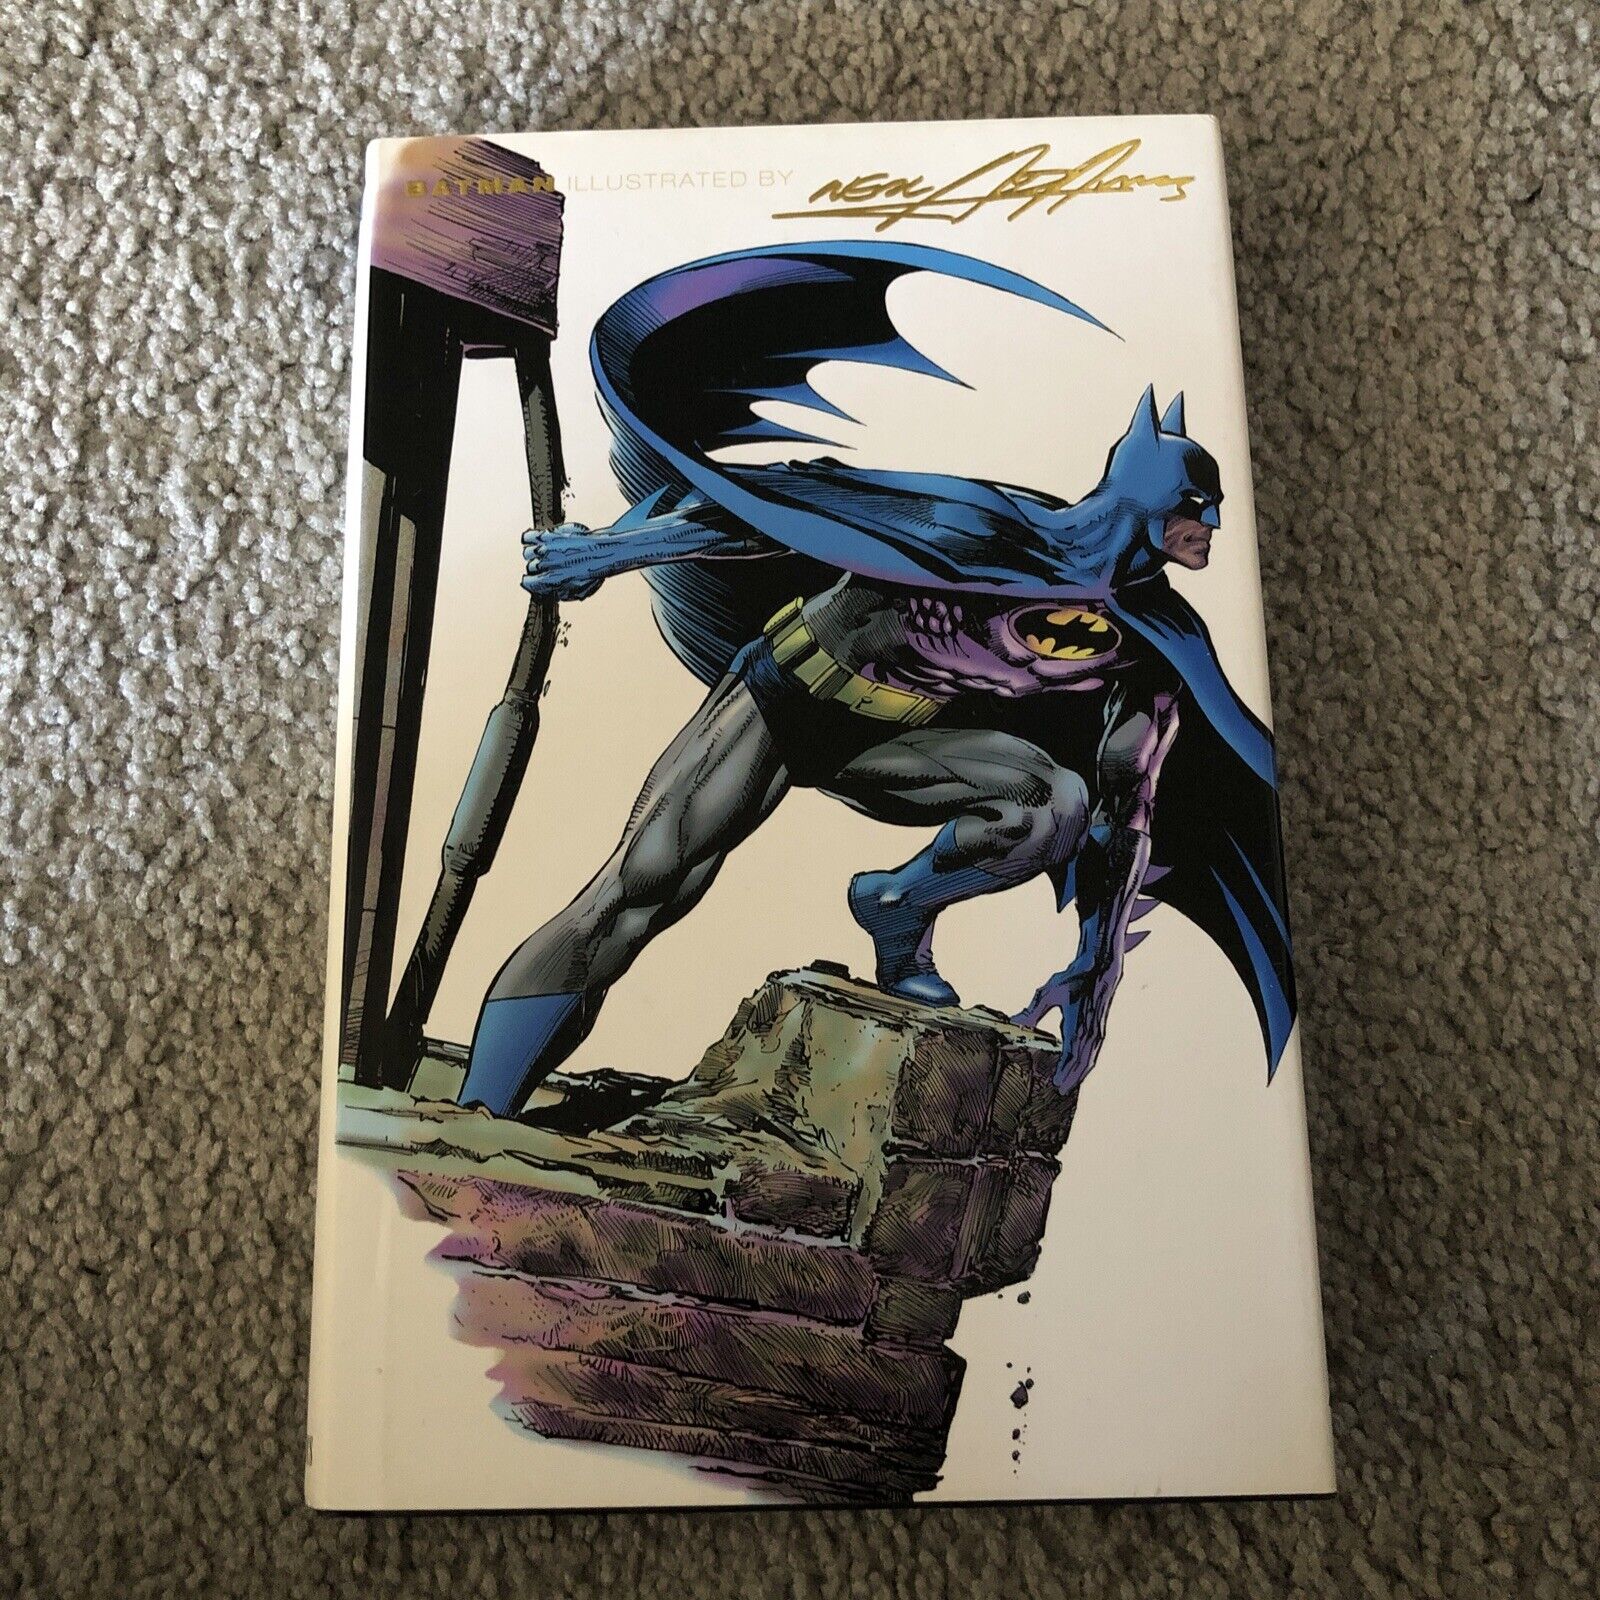 BATMAN ILLUSTRATED BY NEAL ADAMS: VOLUME 3 Signed By Neal Adams